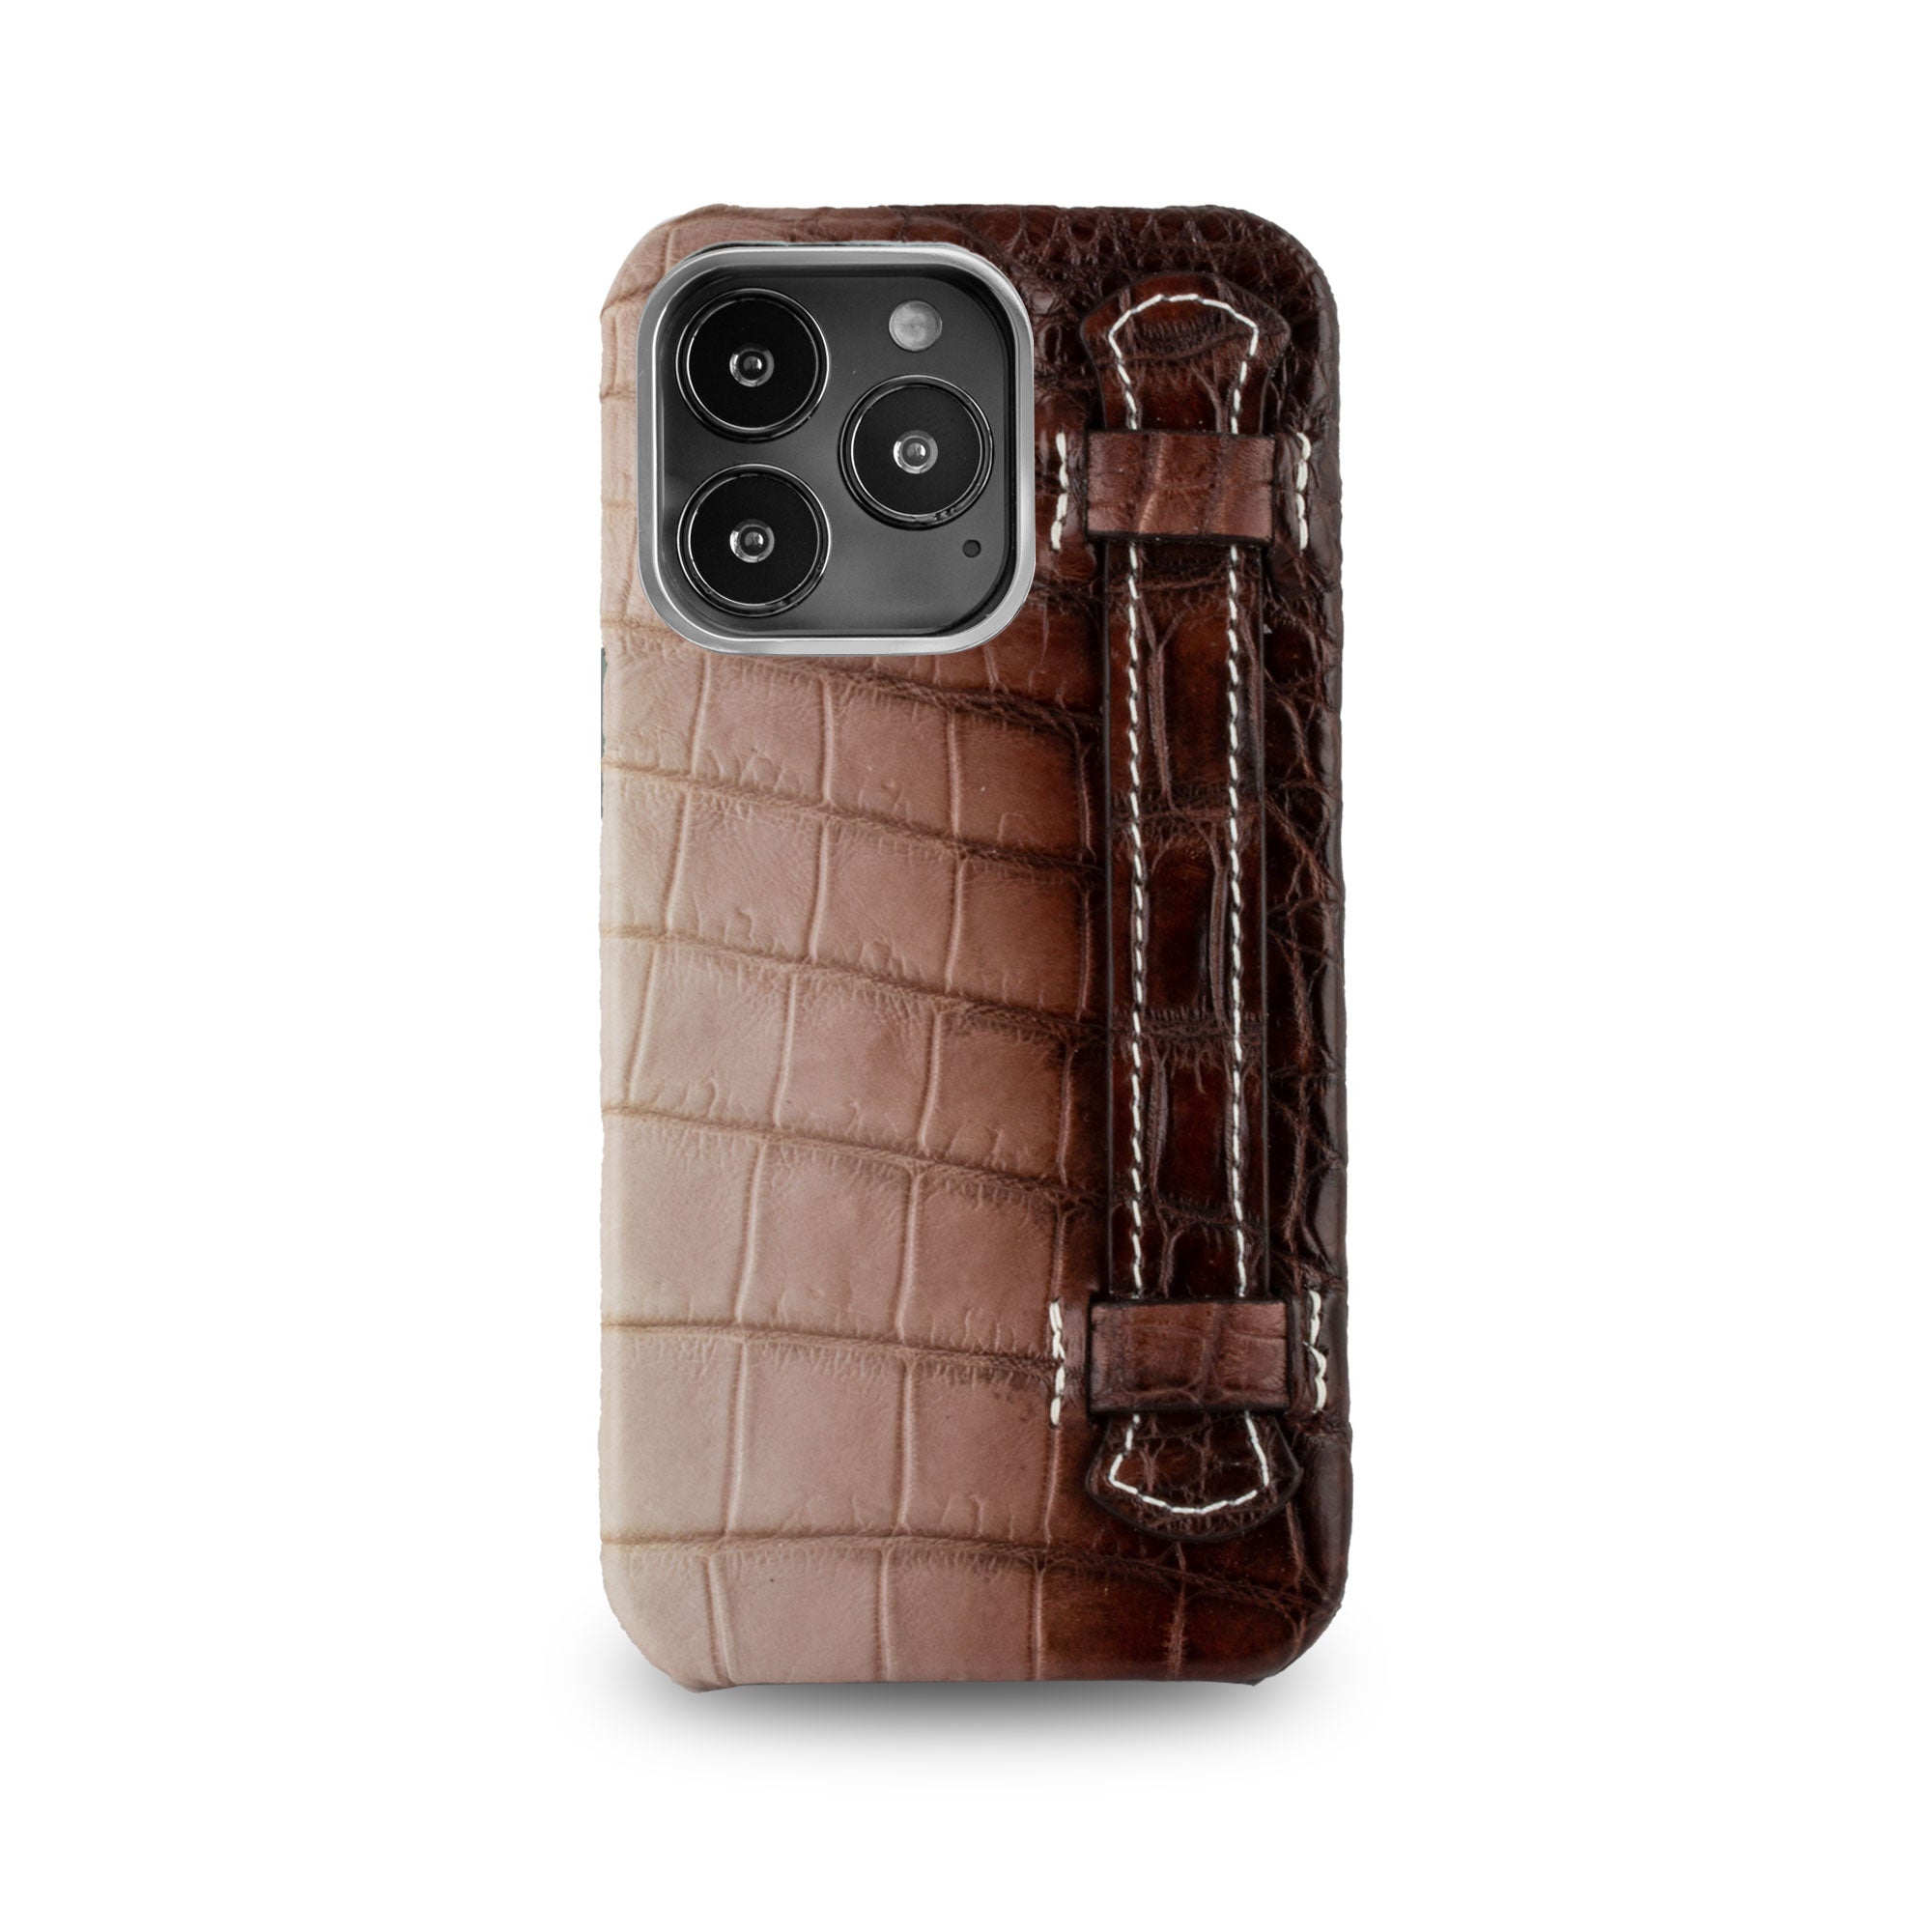 Snakeskin Design Luxury Leather Case For iPhone 11 12 Pro MAX 12